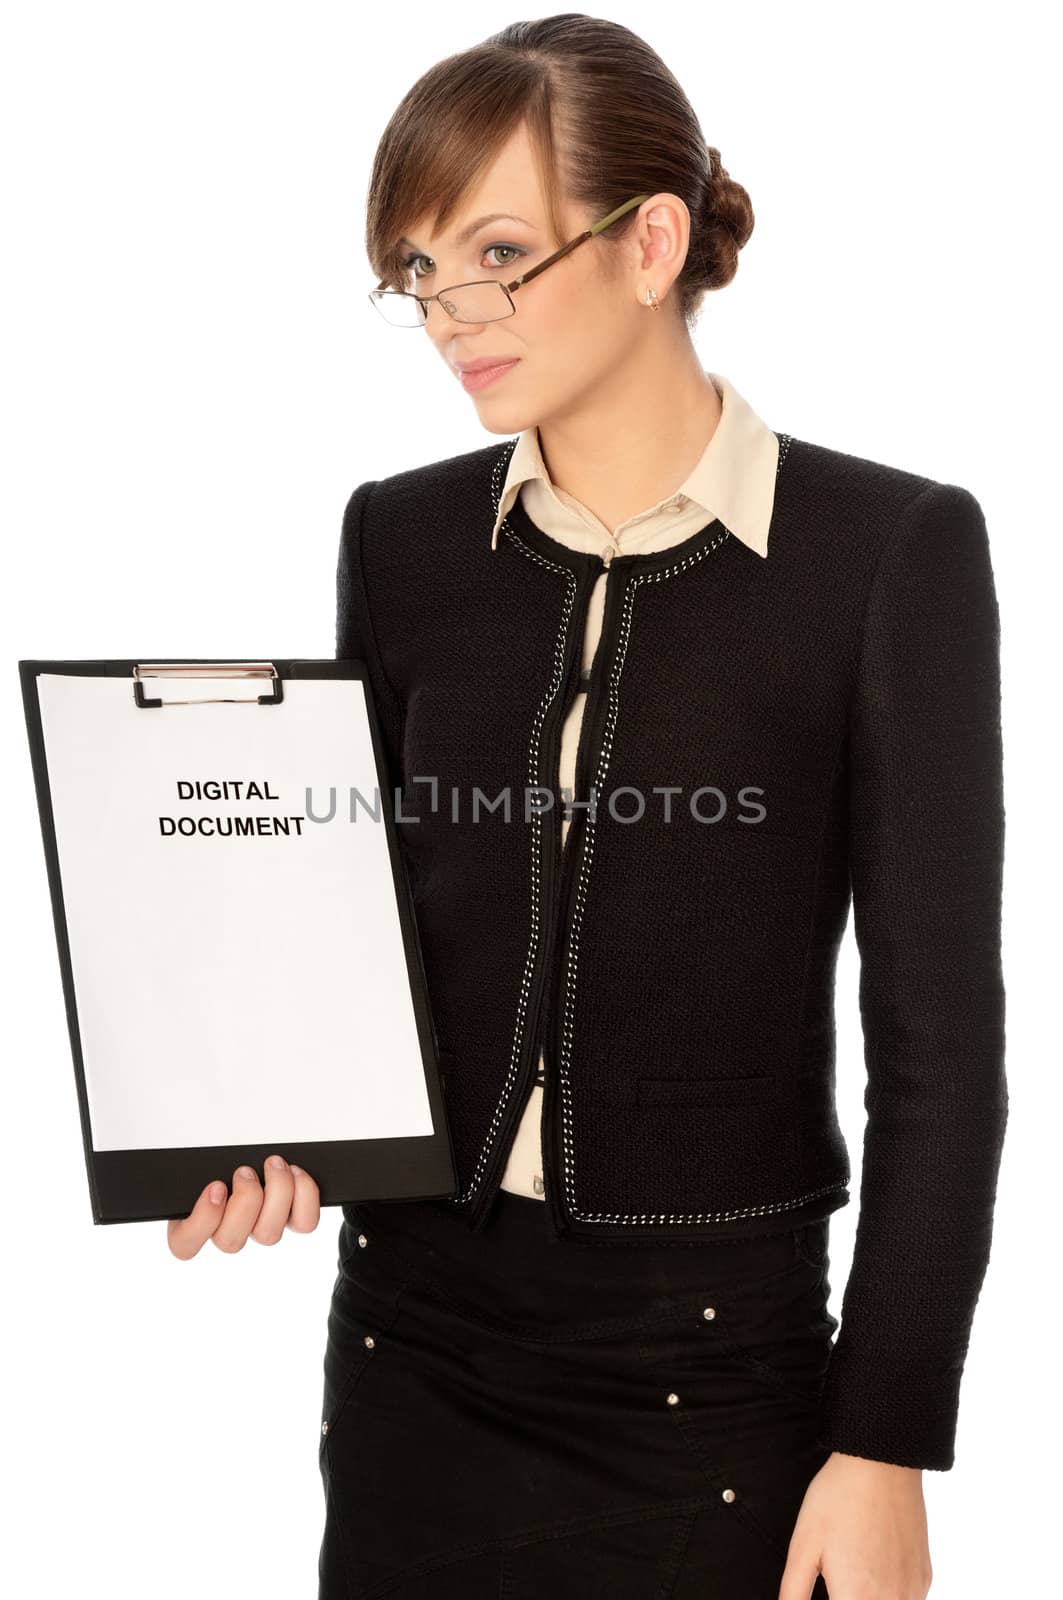 Businesswoman holding digital document in the hand and making presentation